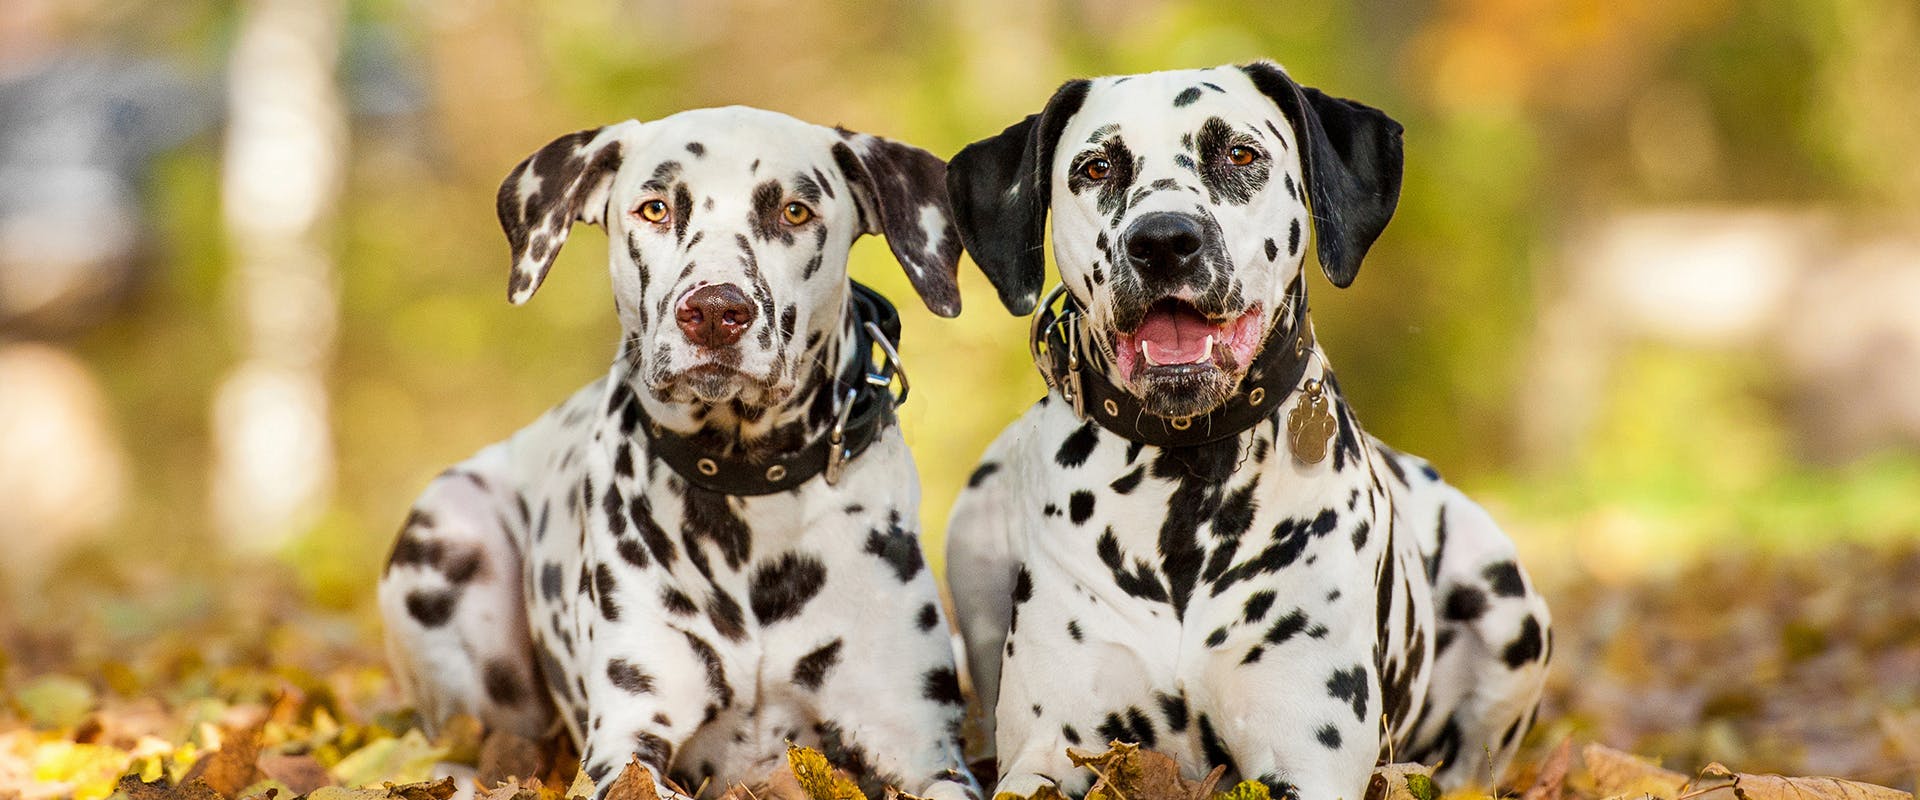 Two Dalmatian dogs sitting side by side